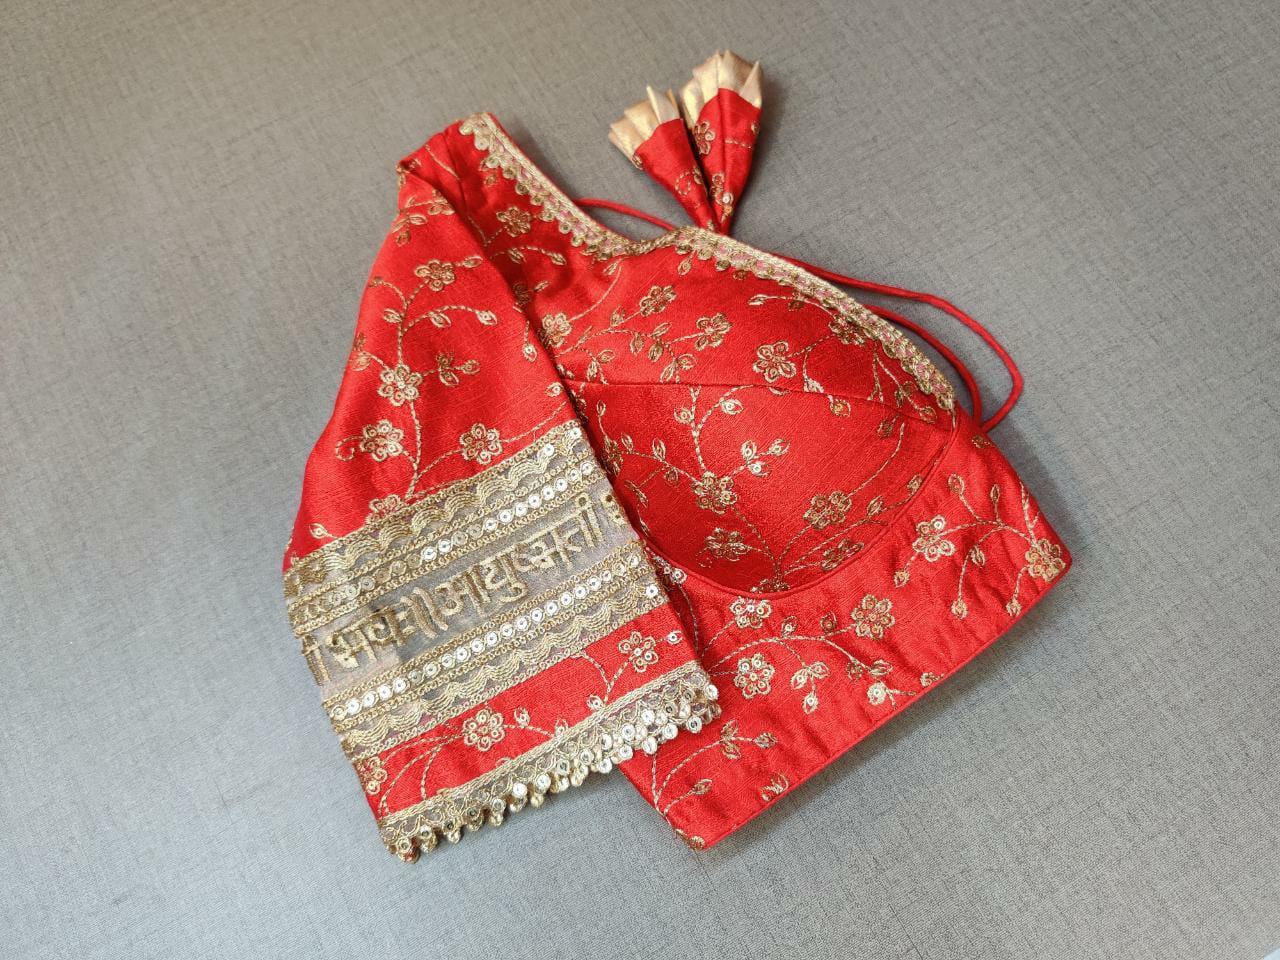 Buy Red and gold-coloured embroidered saree blouse has a deep neck, floral and back open with hook online in USA. Pair this fancy designer sari blouse crafted with beautiful golden lace border, dori ties with ethnic sari, designer saree blouses online, sari blouses from Pure Elegance Indian fashion store in USA.- Sleeve.